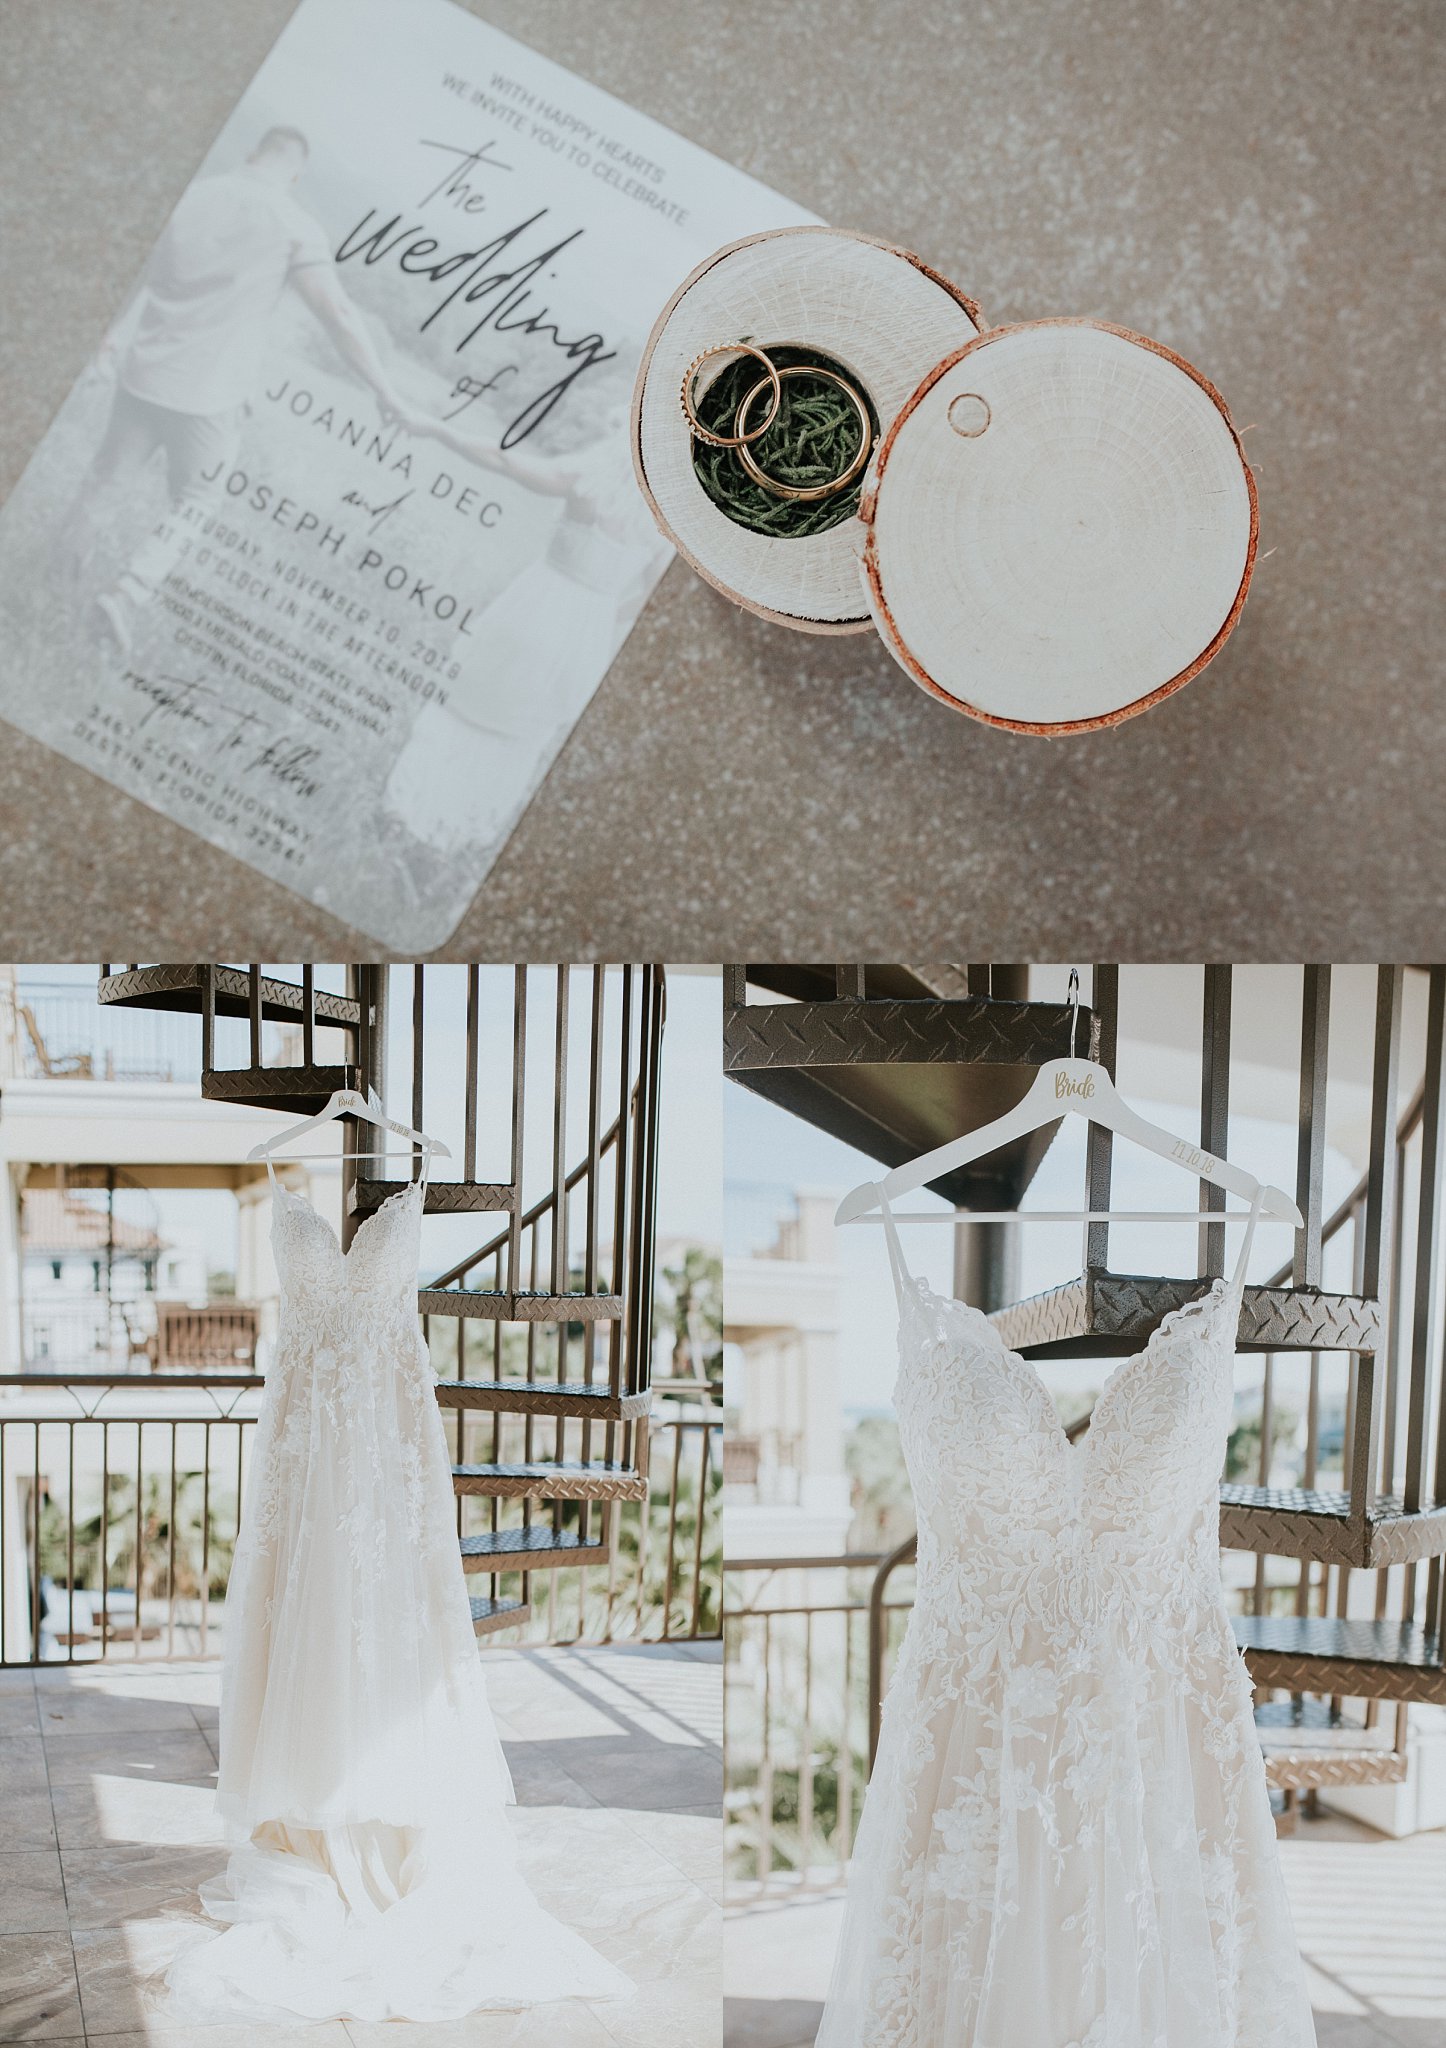 henderson beach state park wedding wedding details, dress, invitations, and rings